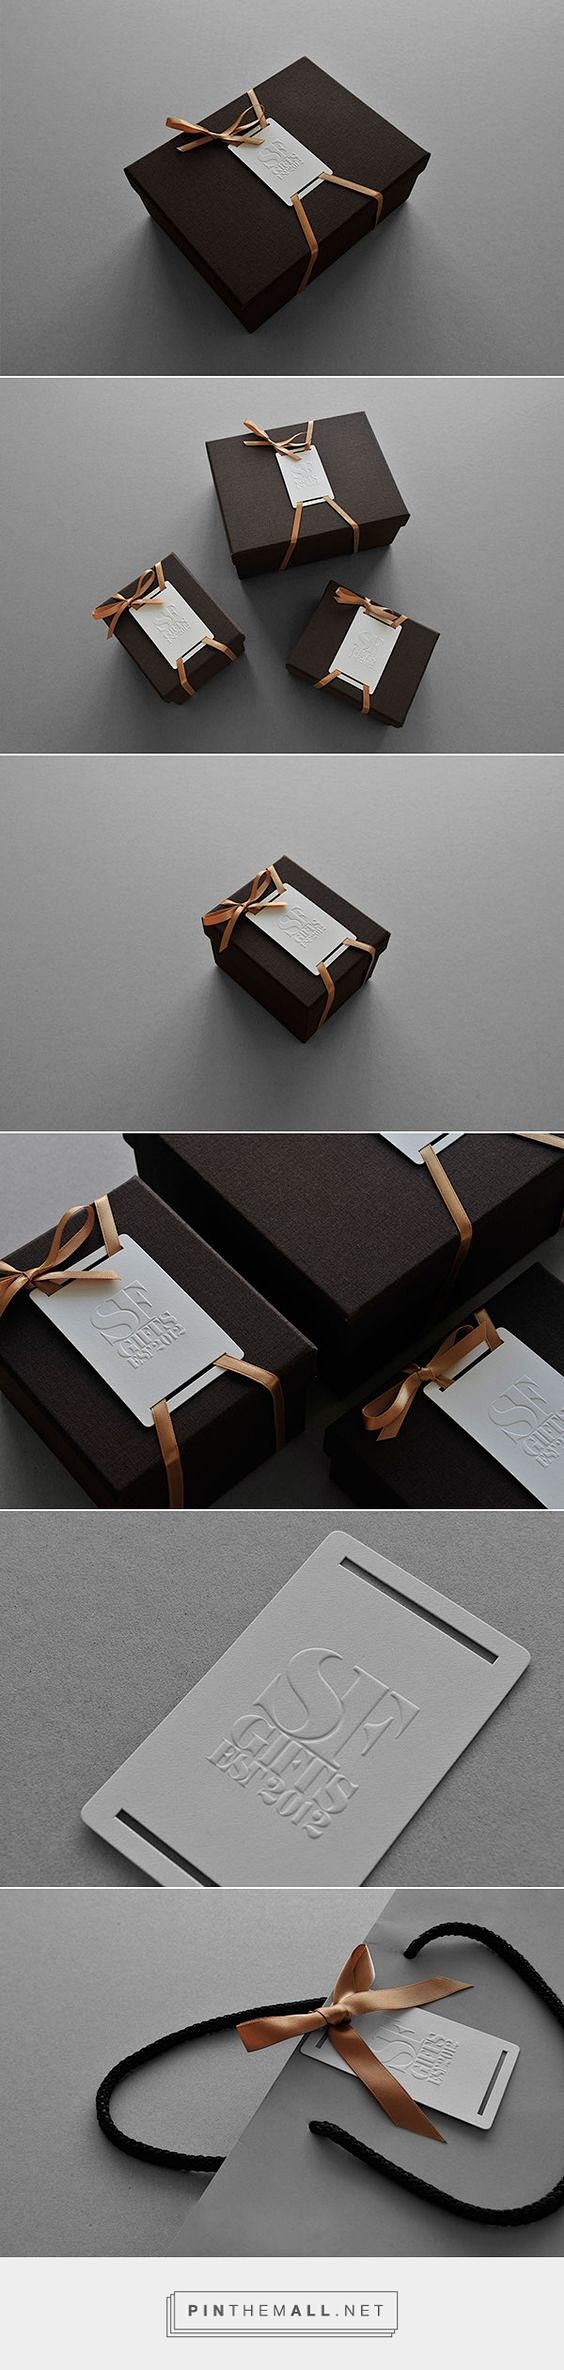 SF Gifts on Behance:...